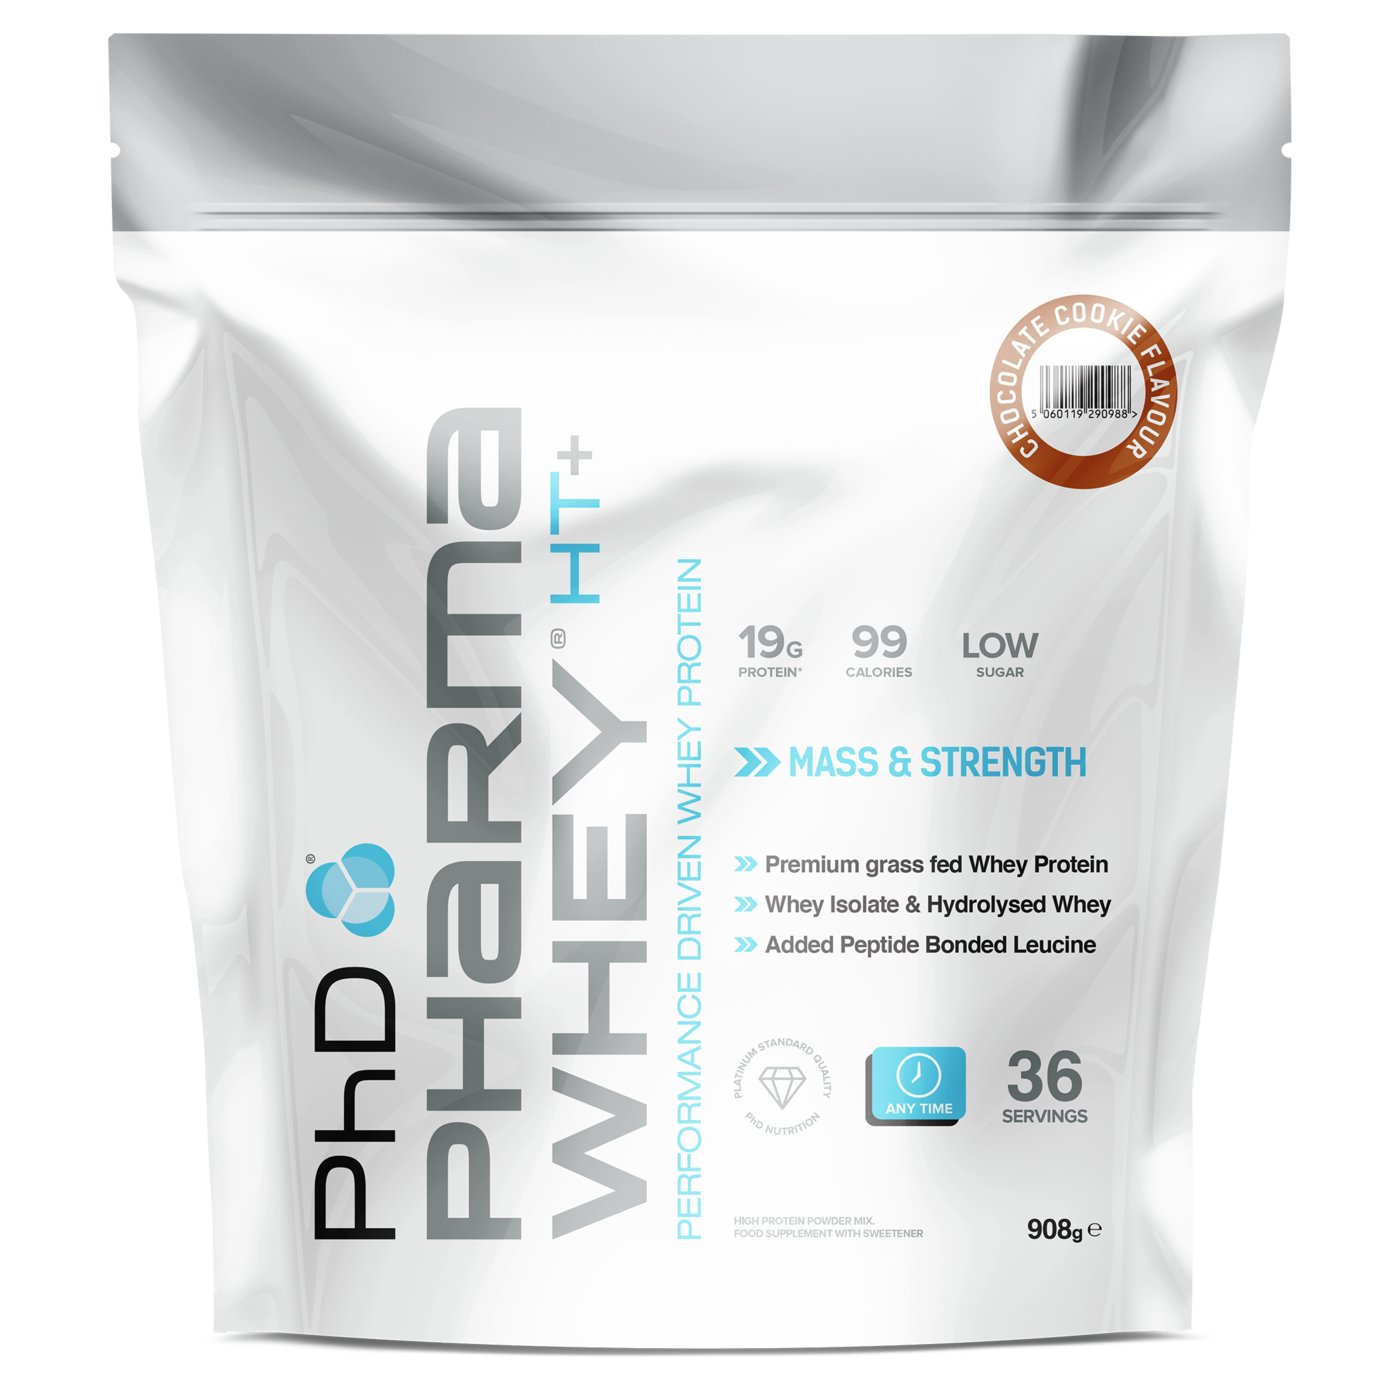 PHD Chocolate Chip Whey HT+ review